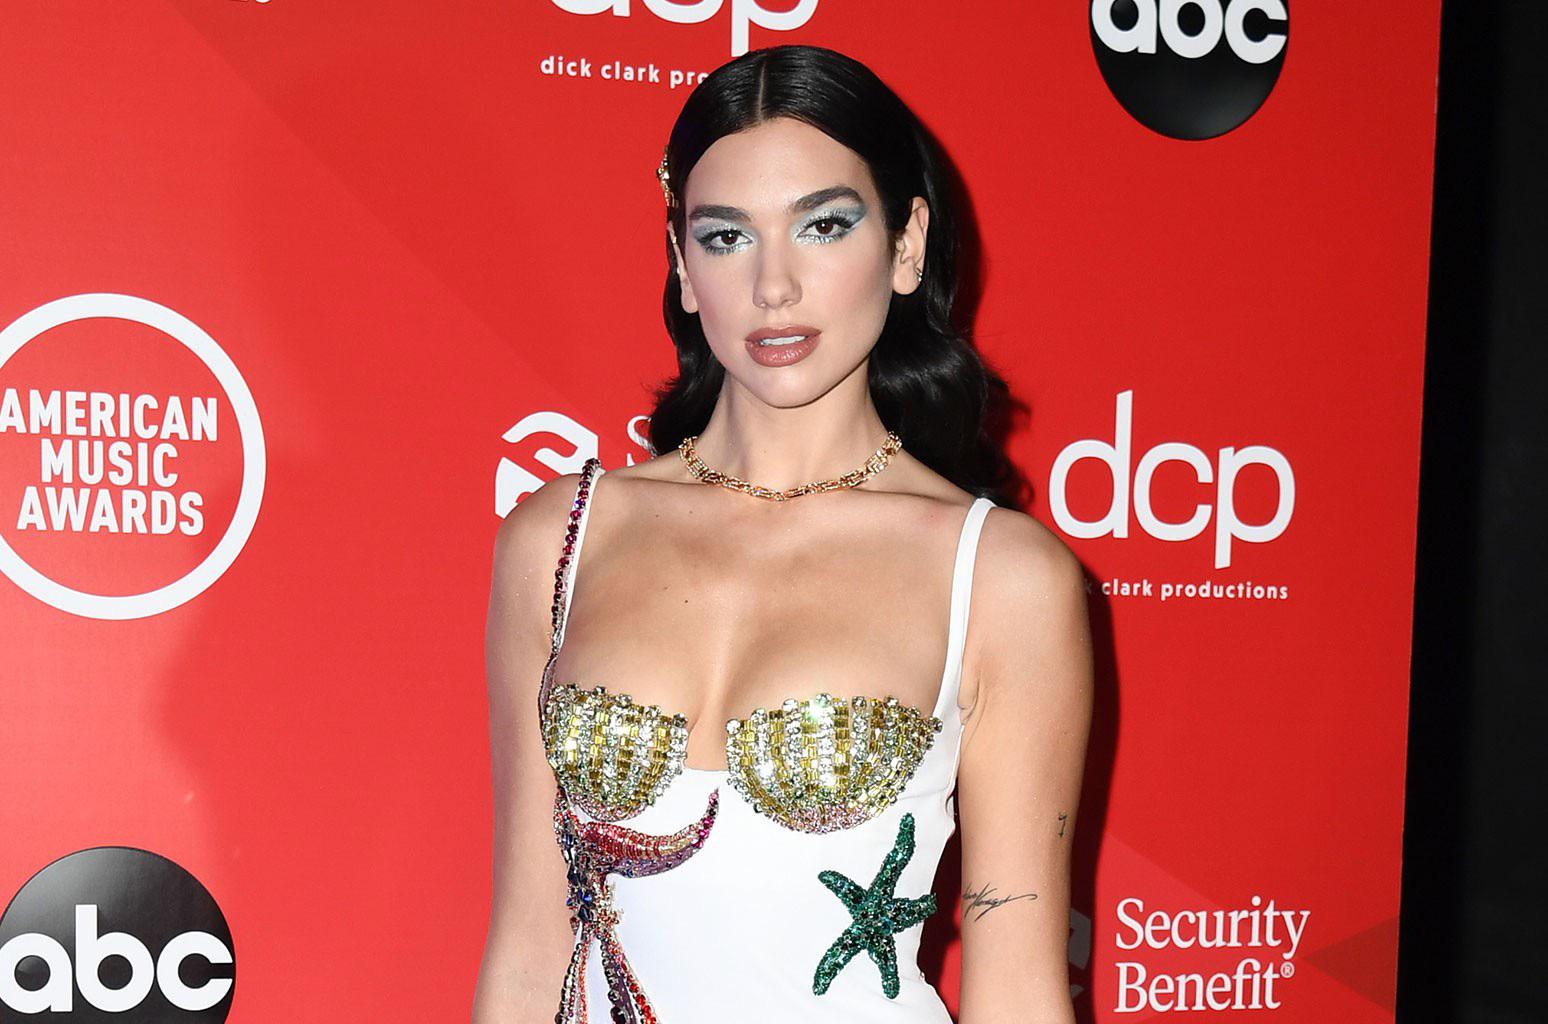 Last night solidified Dua Lipa as the hottest celeb going